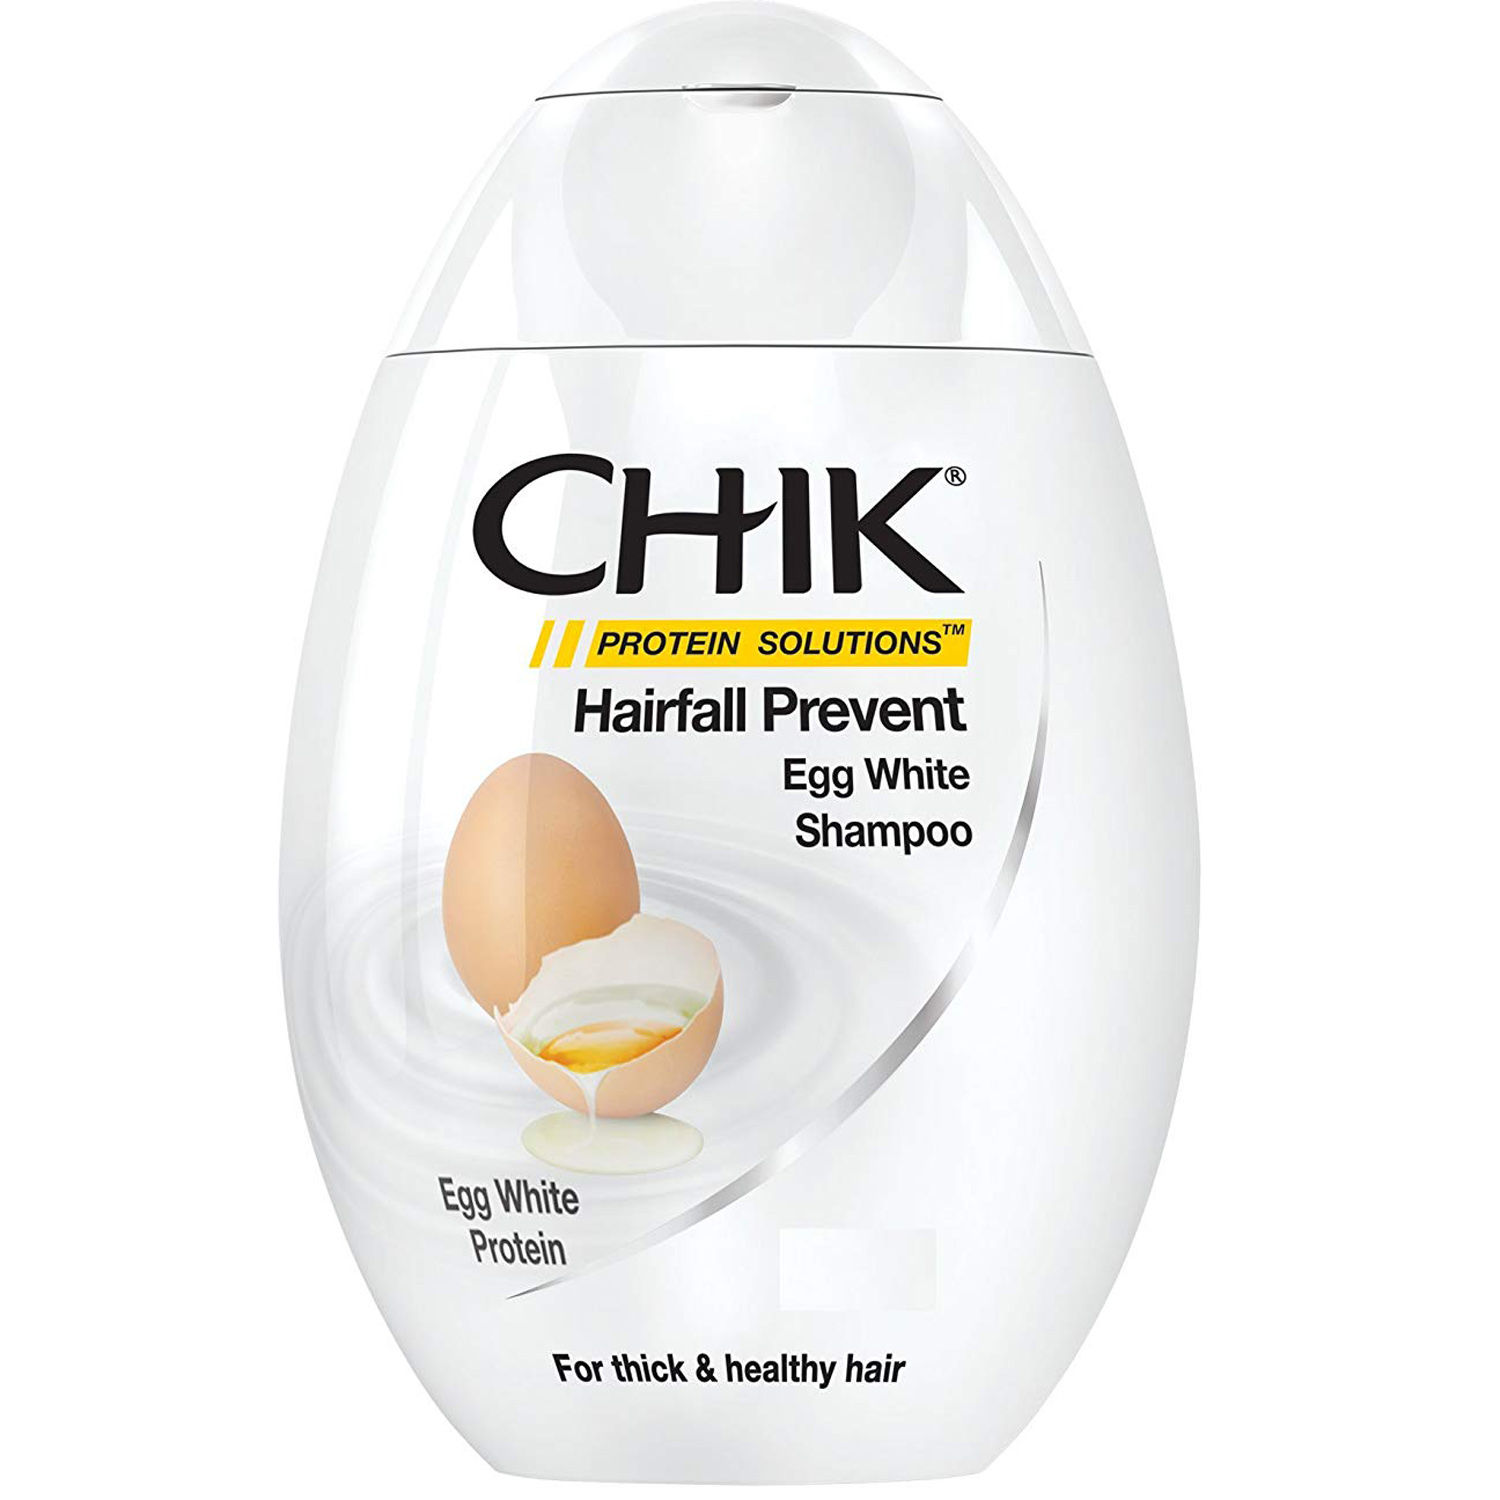 Chik Hairfall Prevent Egg White Protein Shampoo, 80 ml Price, Uses, Side  Effects, Composition - Apollo Pharmacy